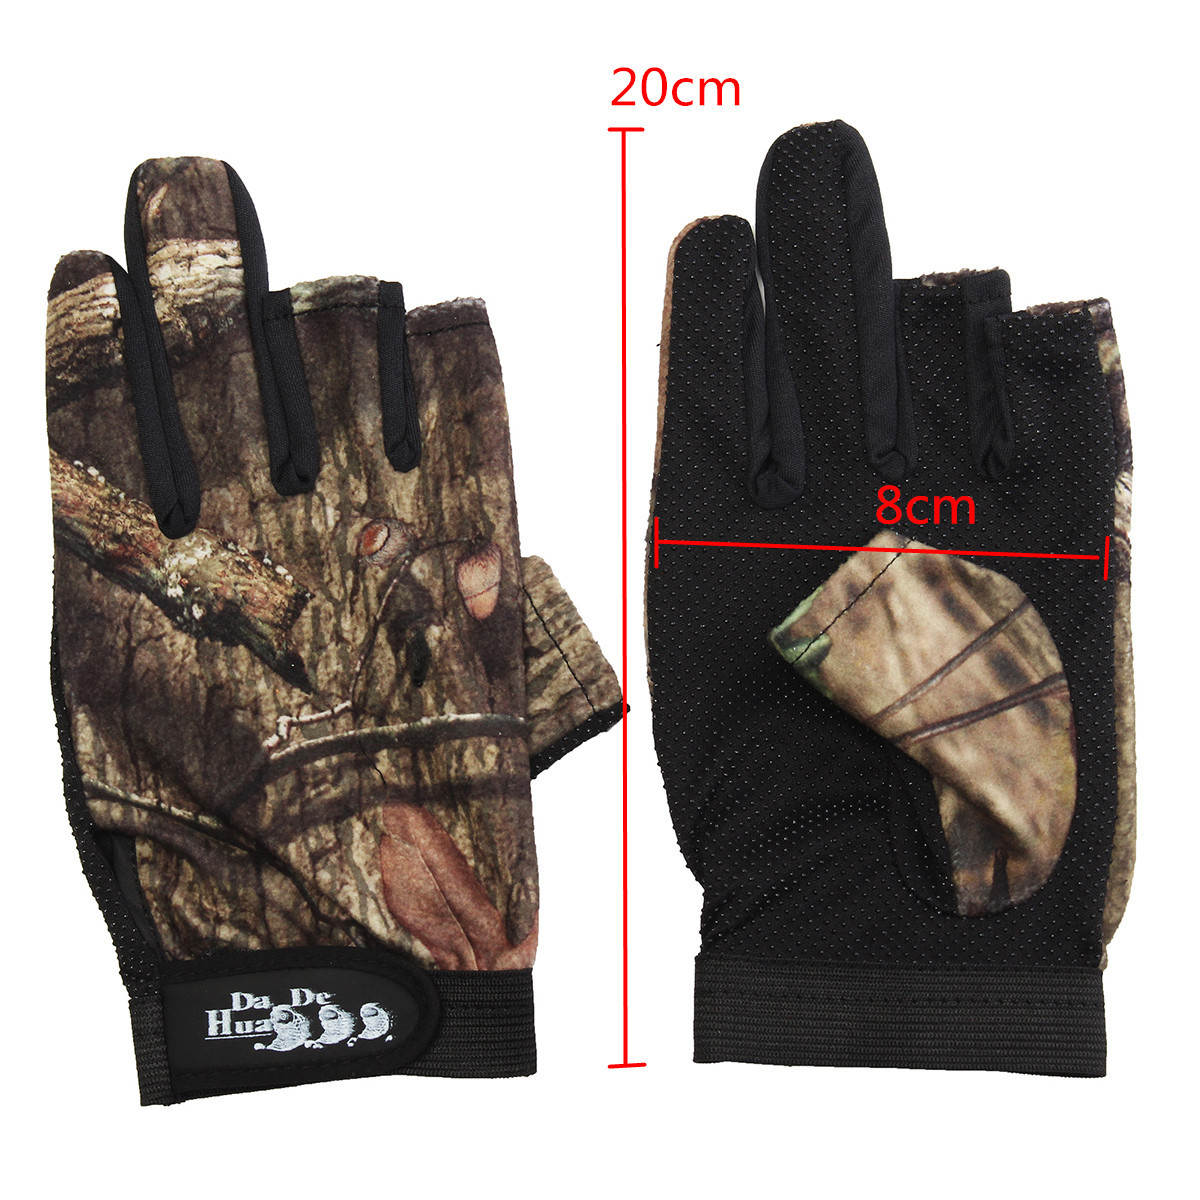 Men-Camouflage-Fishing-Gloves-Hunting-Anti-Slip-Shooting-Camo-Tactical-Outdoor-Breathable-Mittens-1118347